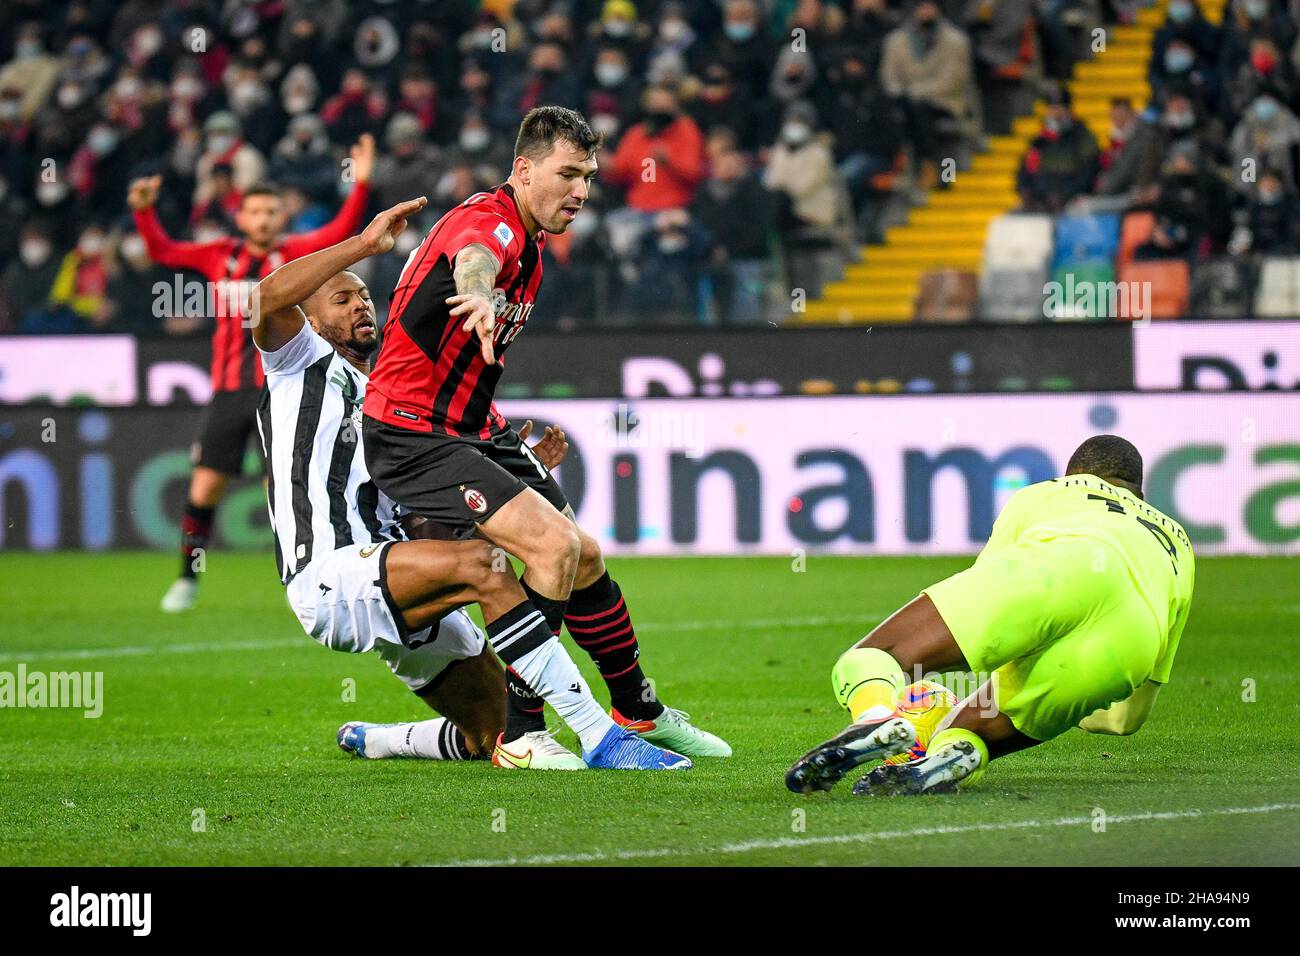 Friuli - Dacia Arena stadium, Udine, Italy, December 11, 2021, Udinese's Norberto Bercique Gomes Betuncal tries to score a goal thwarted by Milan's Alessio Romagnoli (Milan)  during  Udinese Calcio vs AC Milan - italian soccer Serie A match Stock Photo